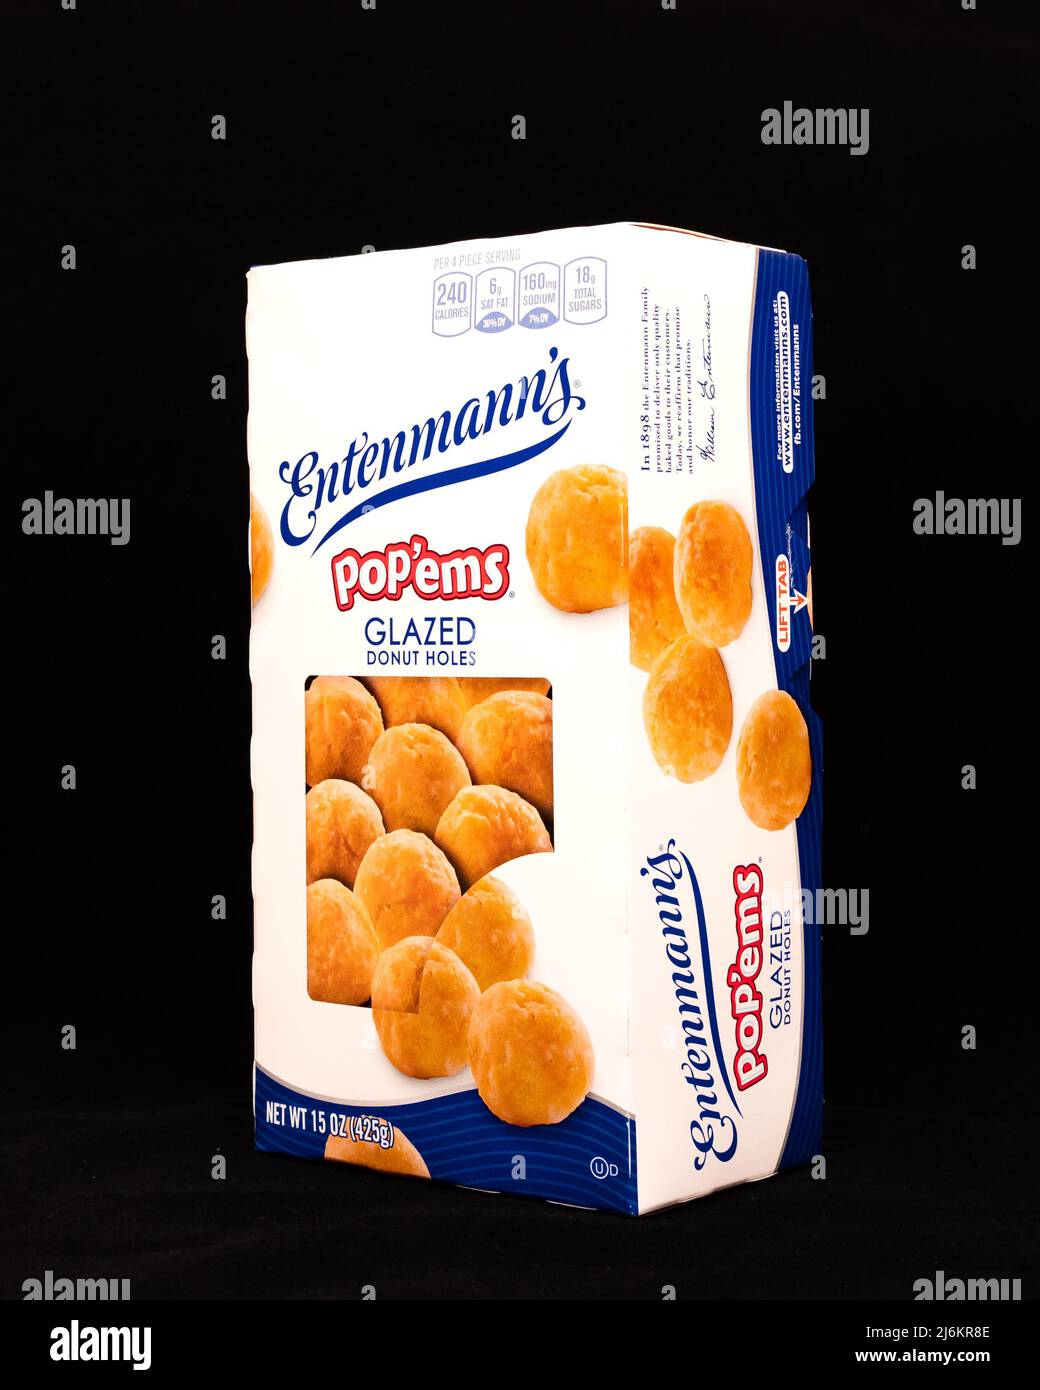 A box of Entenmann's glazed PoP'ems donut holes, with a soft yellow cake center isolated on black Stock Photo